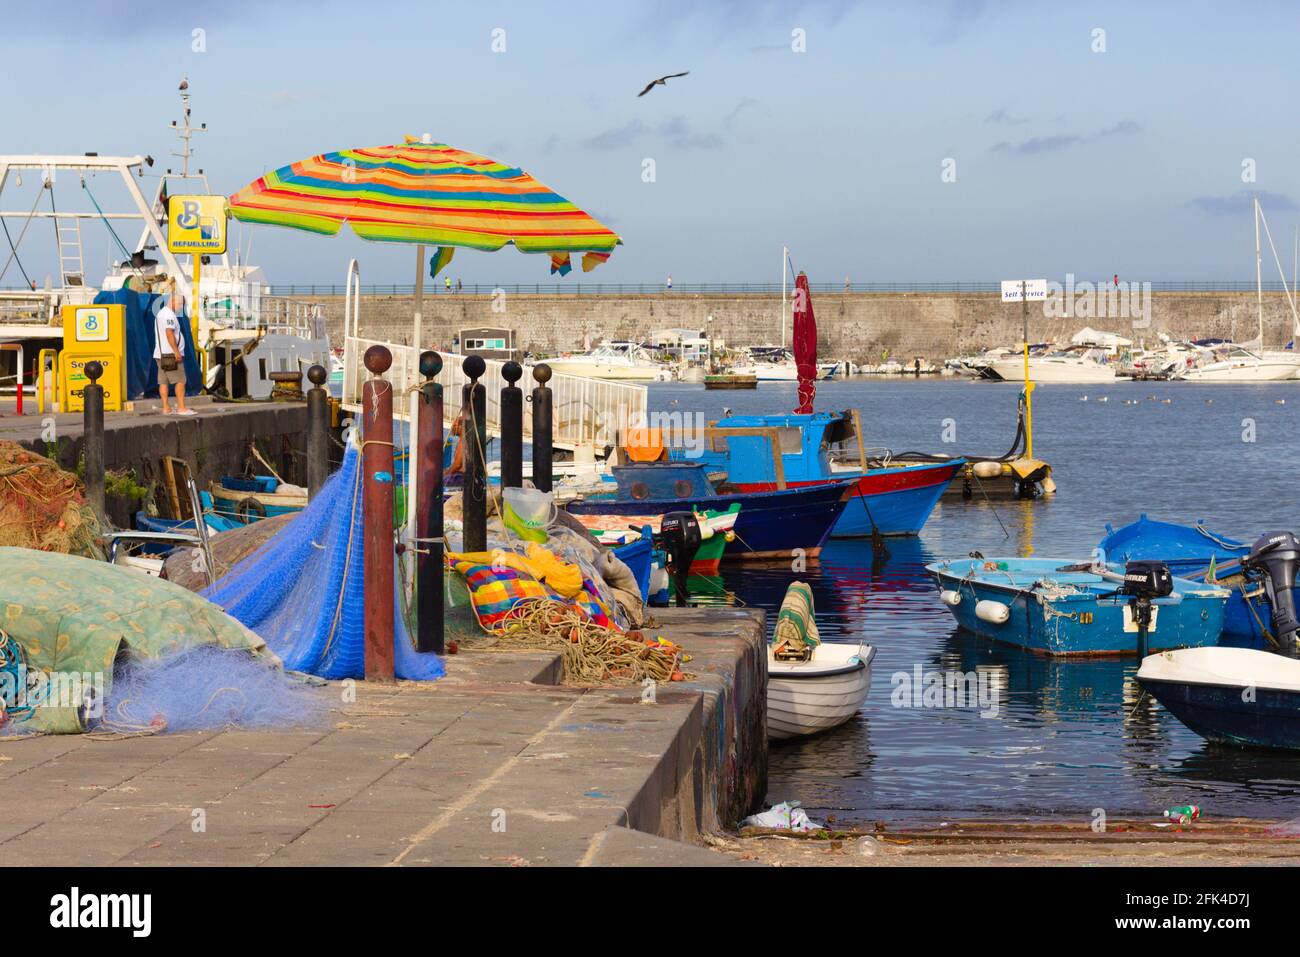 TORRE DEL GRECO, ITALY - Aug 14, 2019: A view of the harbour of Torre del Greco, Naples, where fishermen depart and come back after the daily fishing Stock Photo